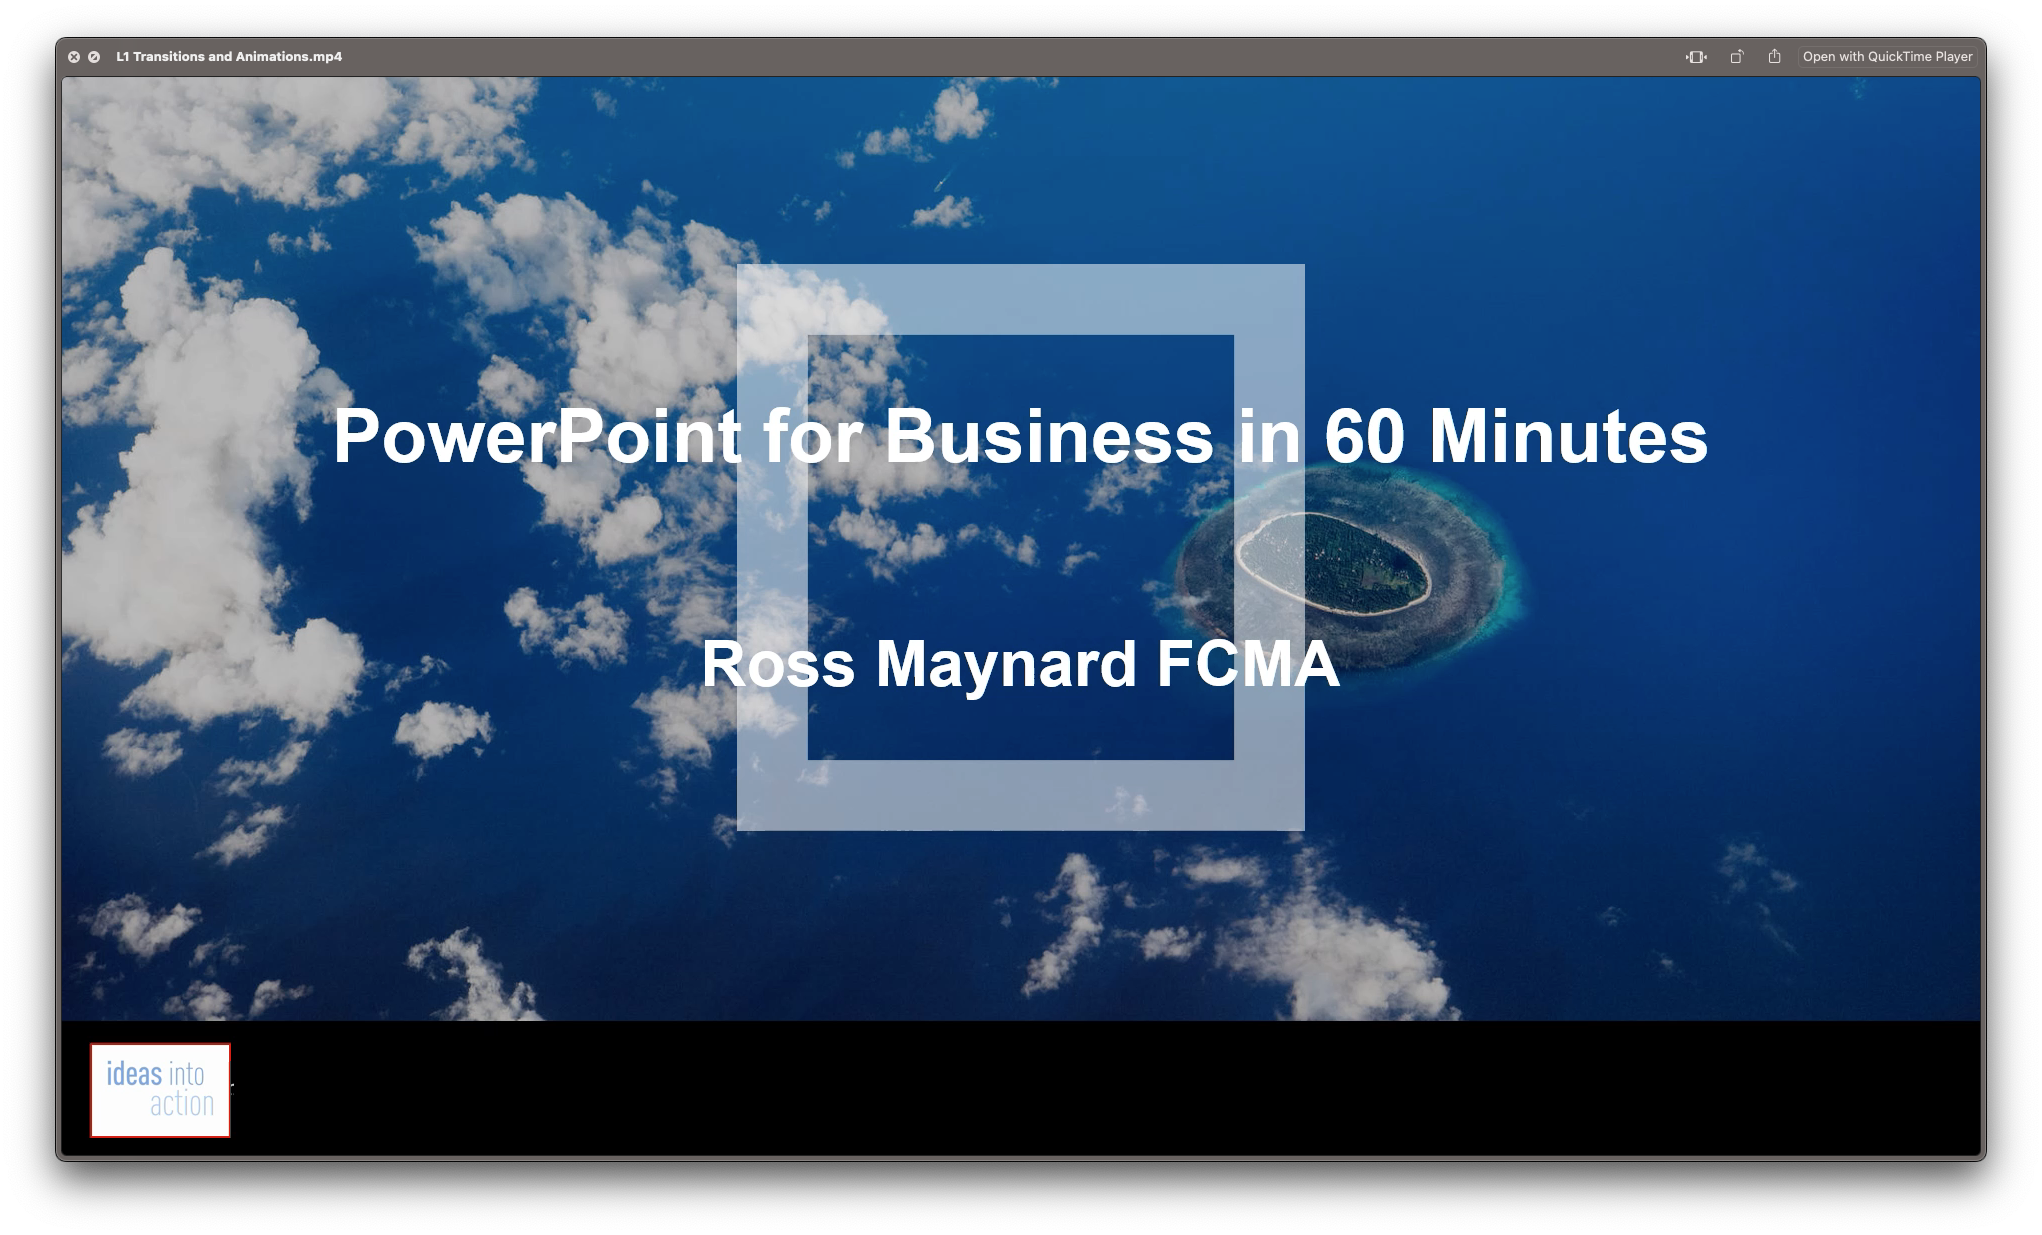 PowerPoint for Business in 60 Minutes